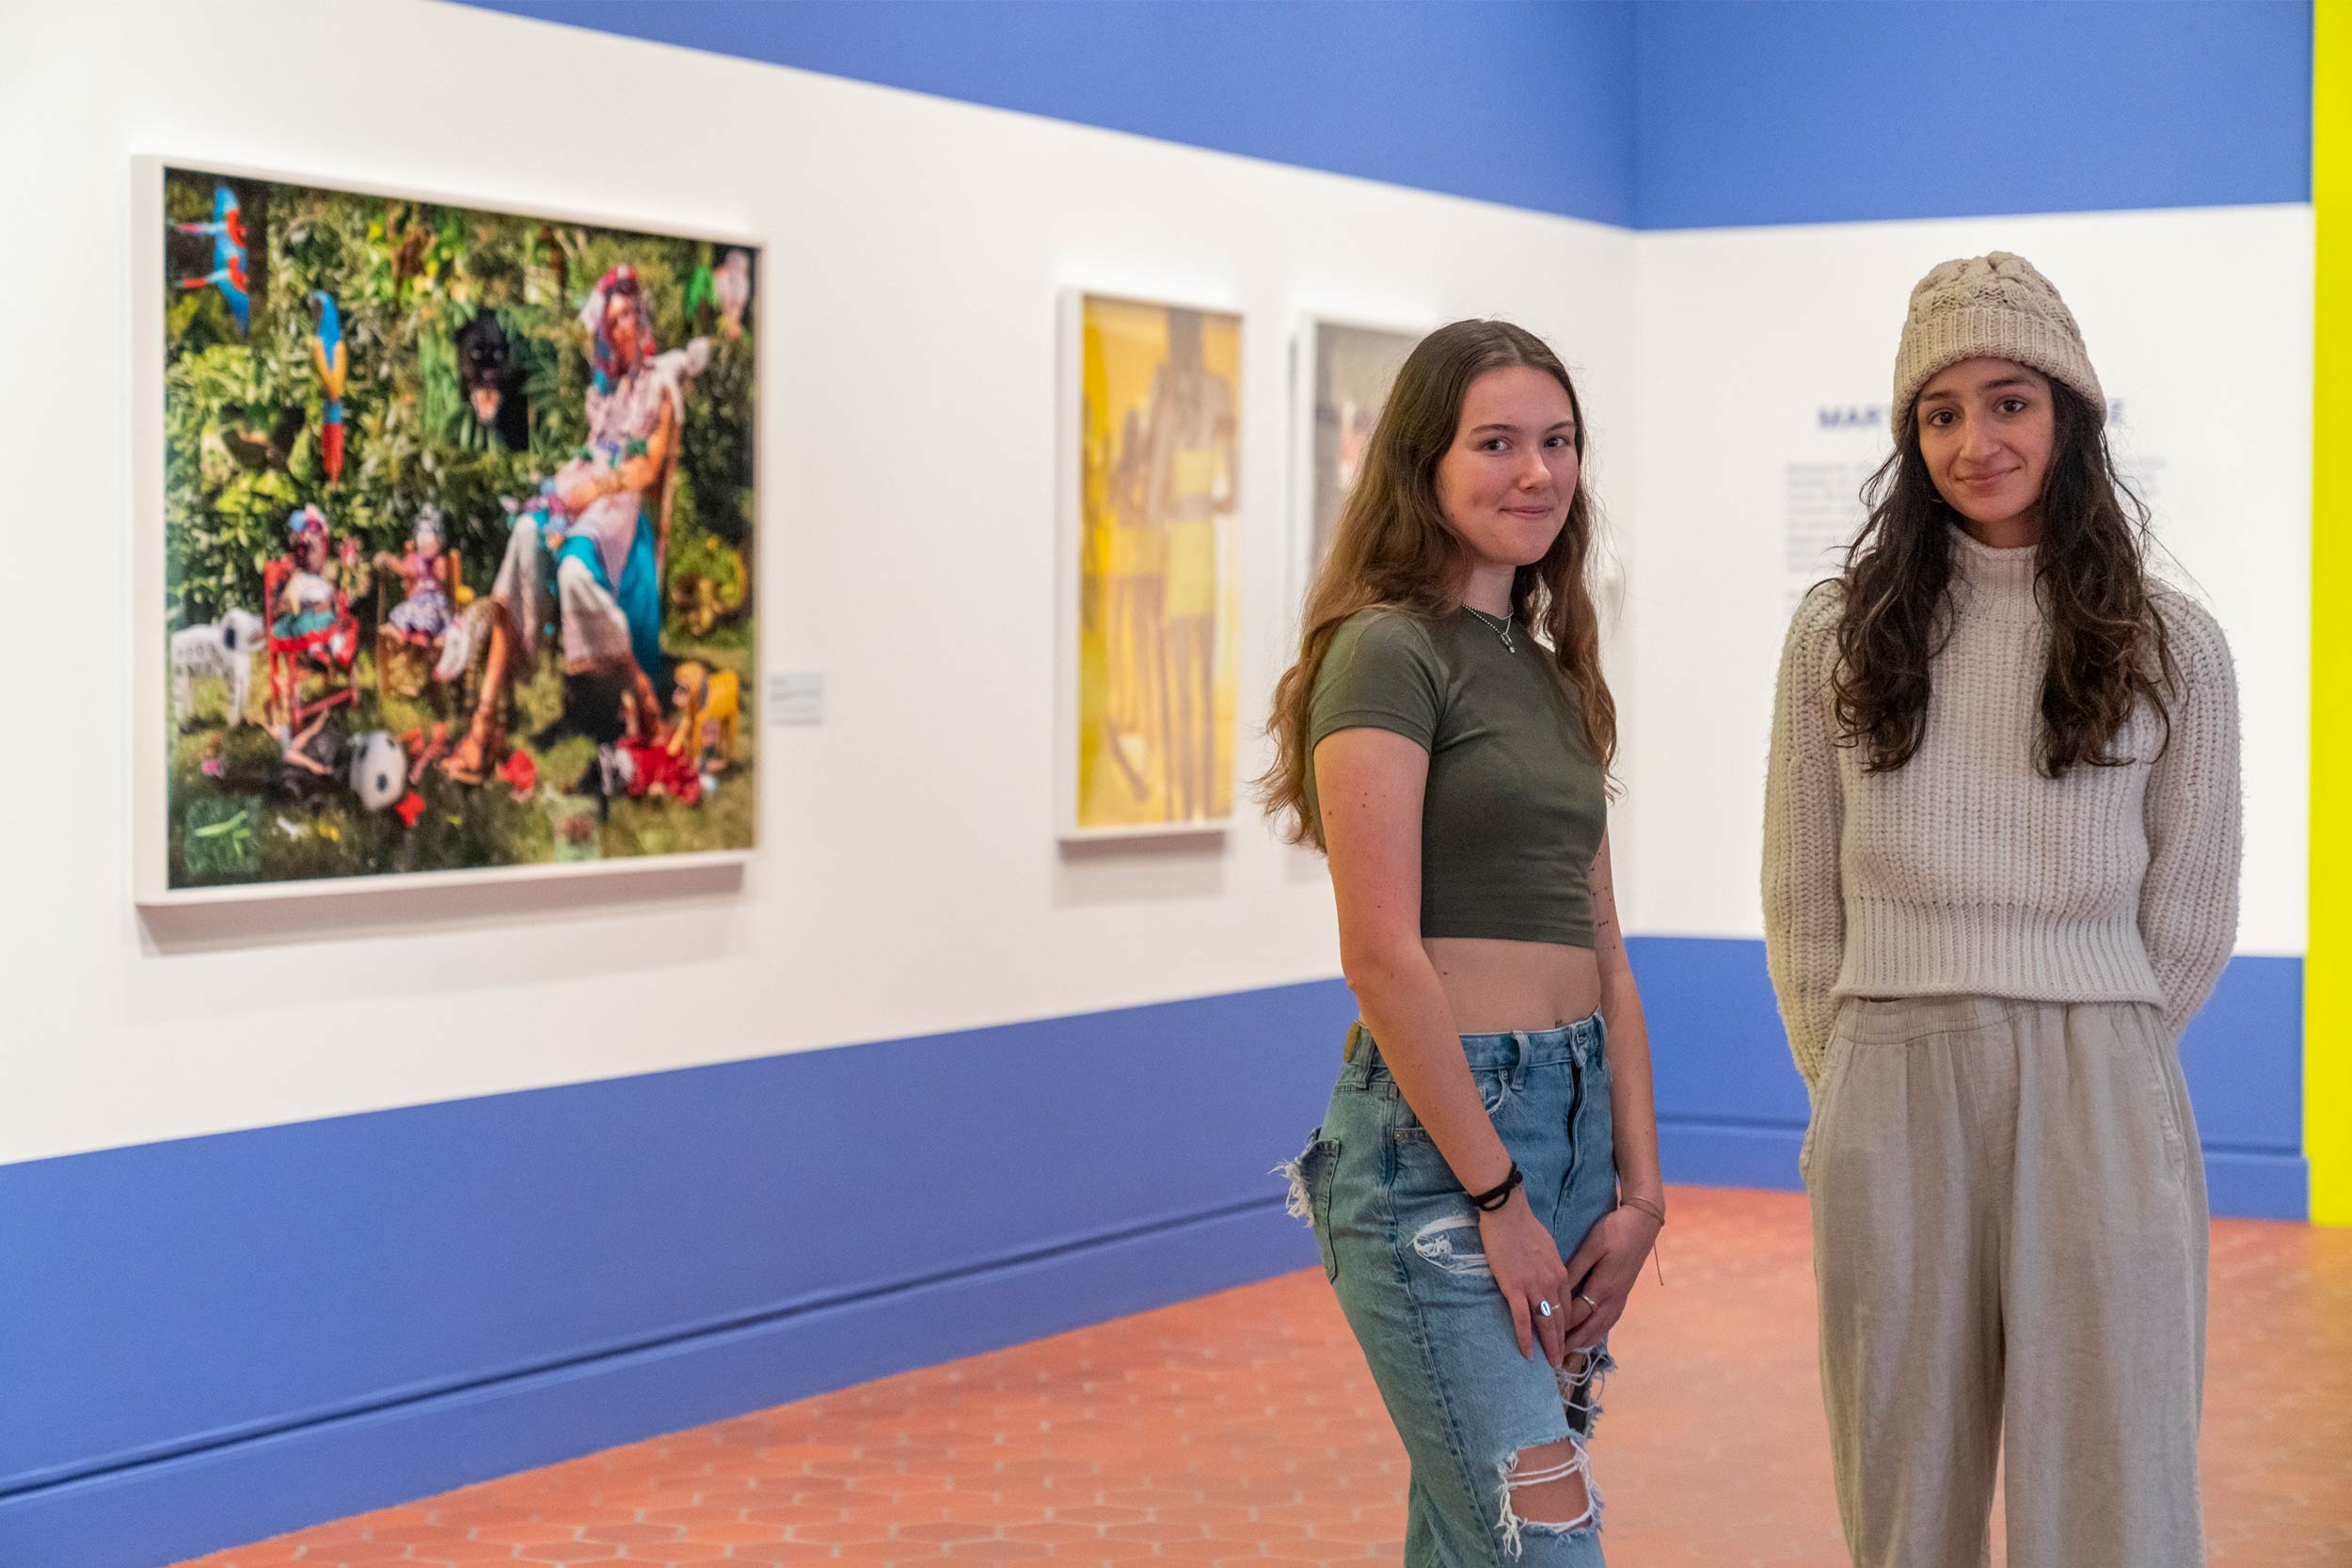 Ava Proehl, left, and Kate MacArthur, right stand in front of their art work smiling at the camera